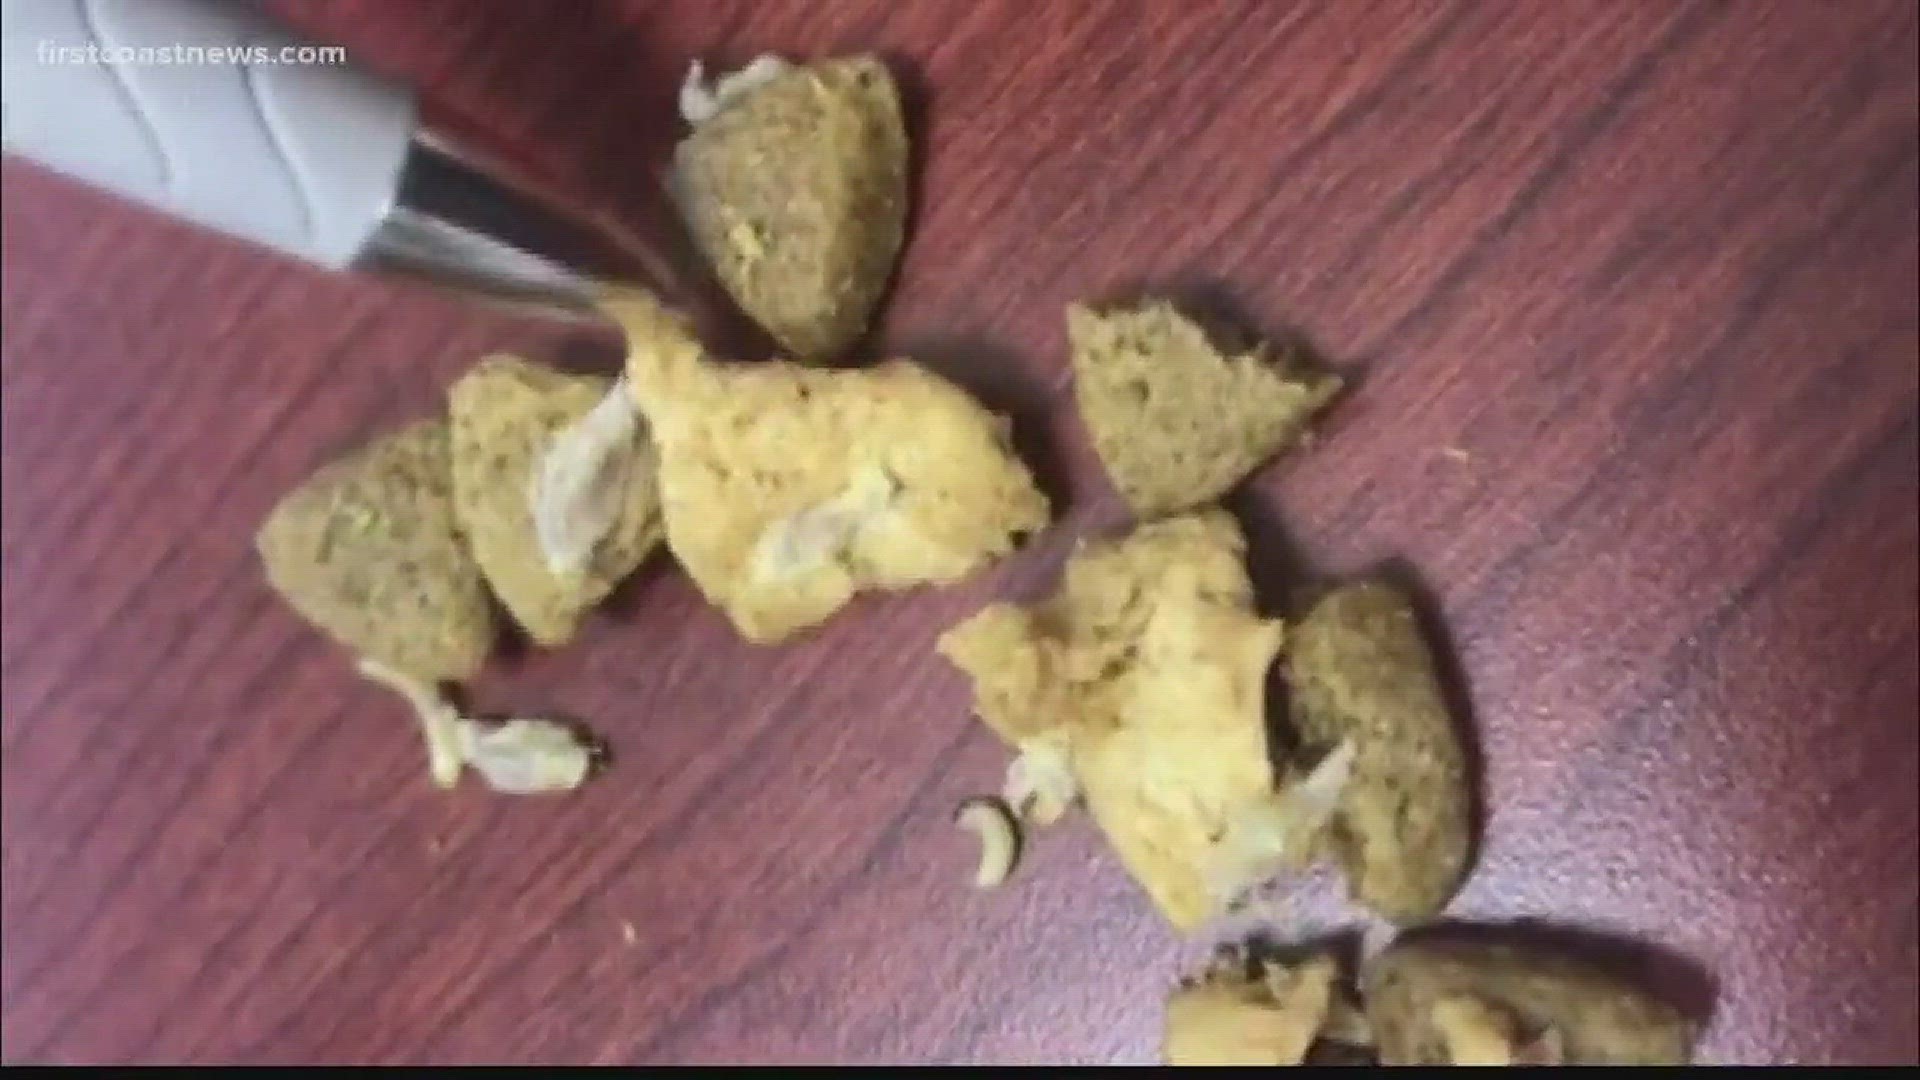 He said he checked his dog's food after seeing a similar incident reported on social media. When he checked, he found larvae and moths, he said.